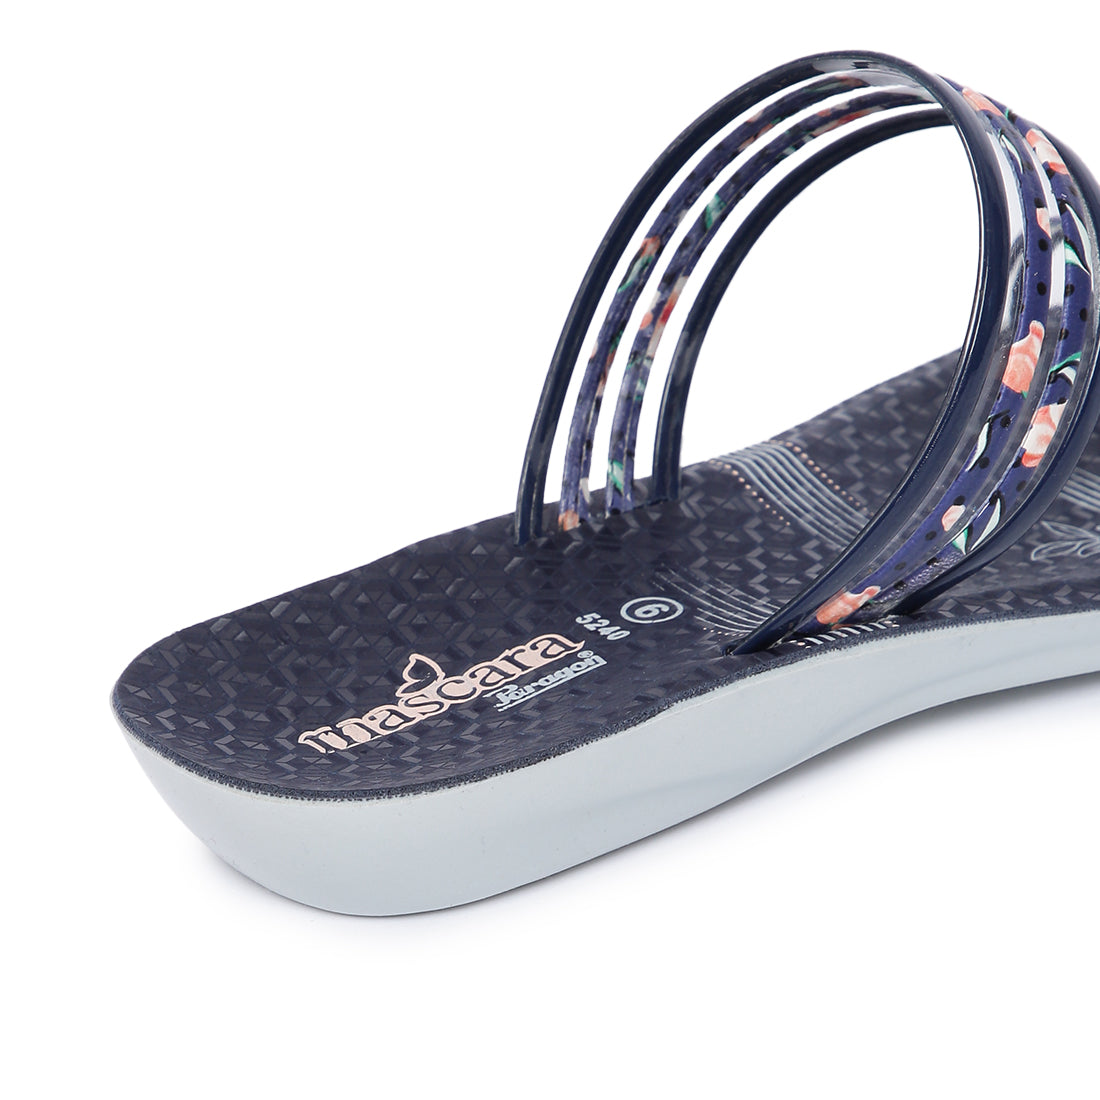 Paragon PU5240L Women Sandals | Casual &amp; Formal Sandals | Stylish, Comfortable &amp; Durable | For Daily &amp; Occasion Wear